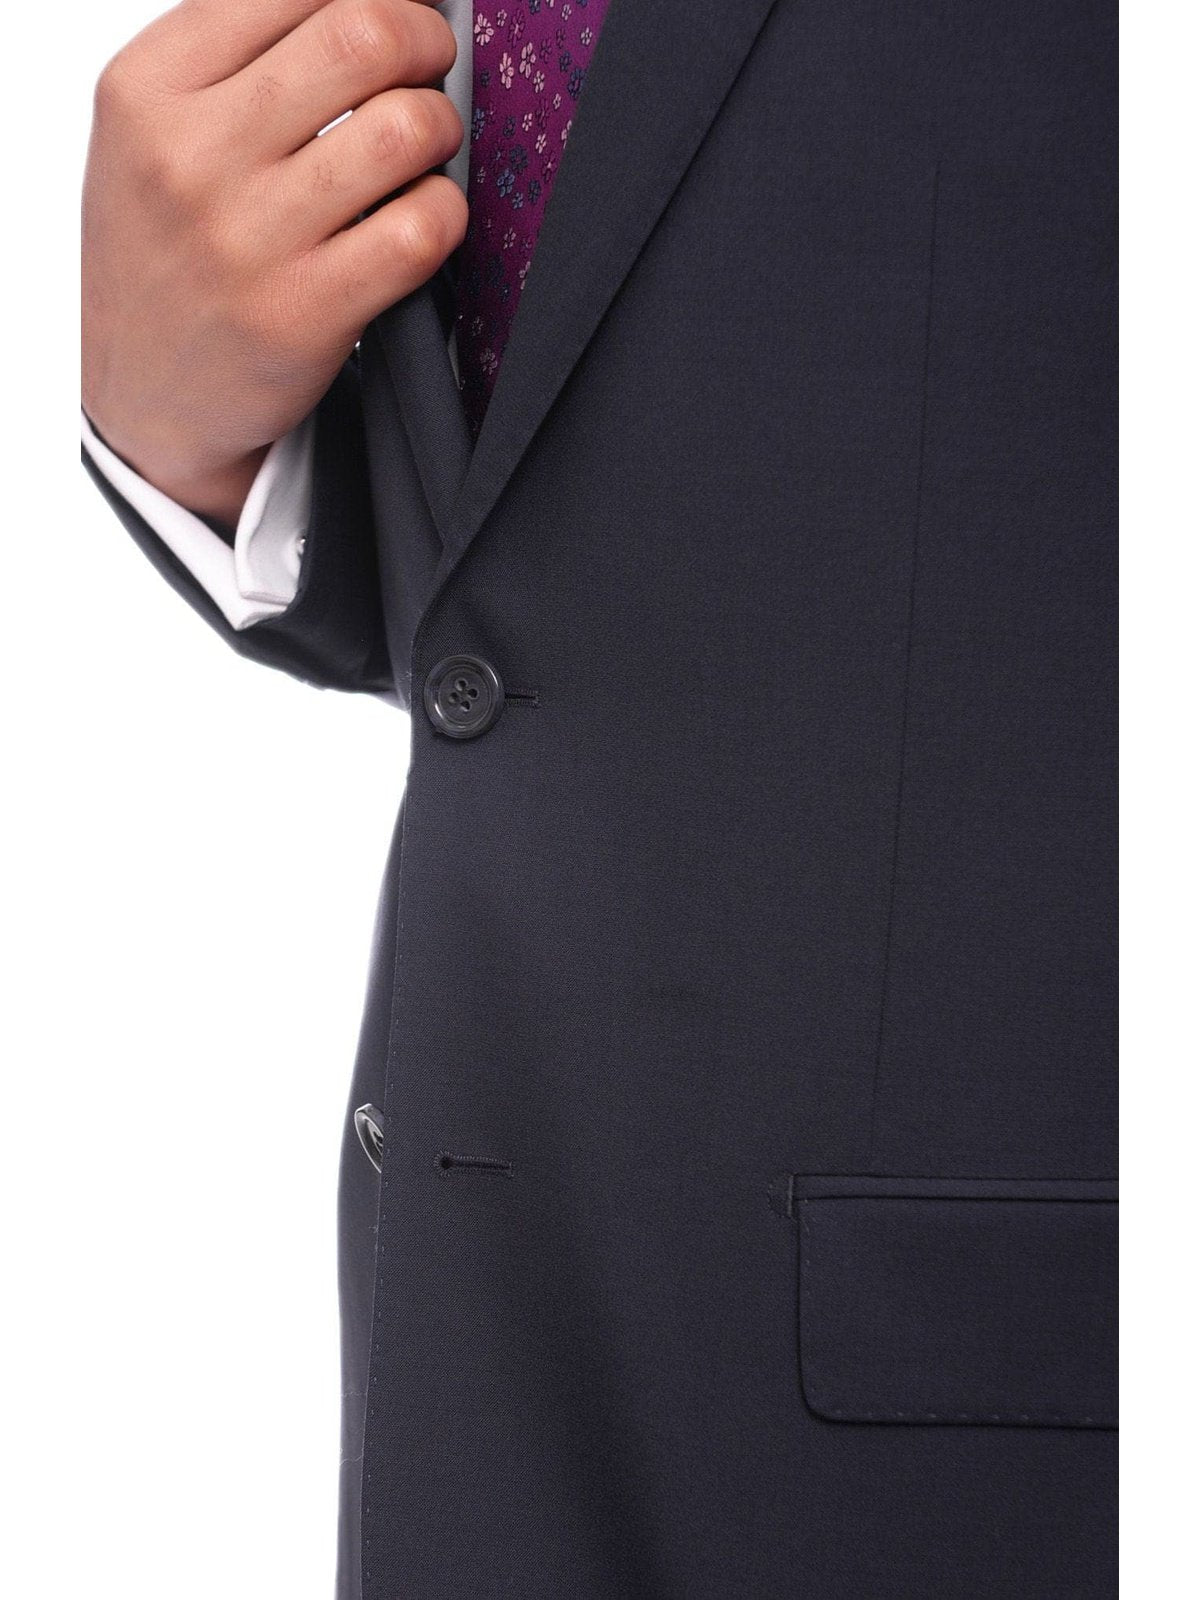 Napoli TWO PIECE SUITS Napoli Slim Fit Solid Navy Blue Two Button Half Canvassed Marzotto Wool Suit